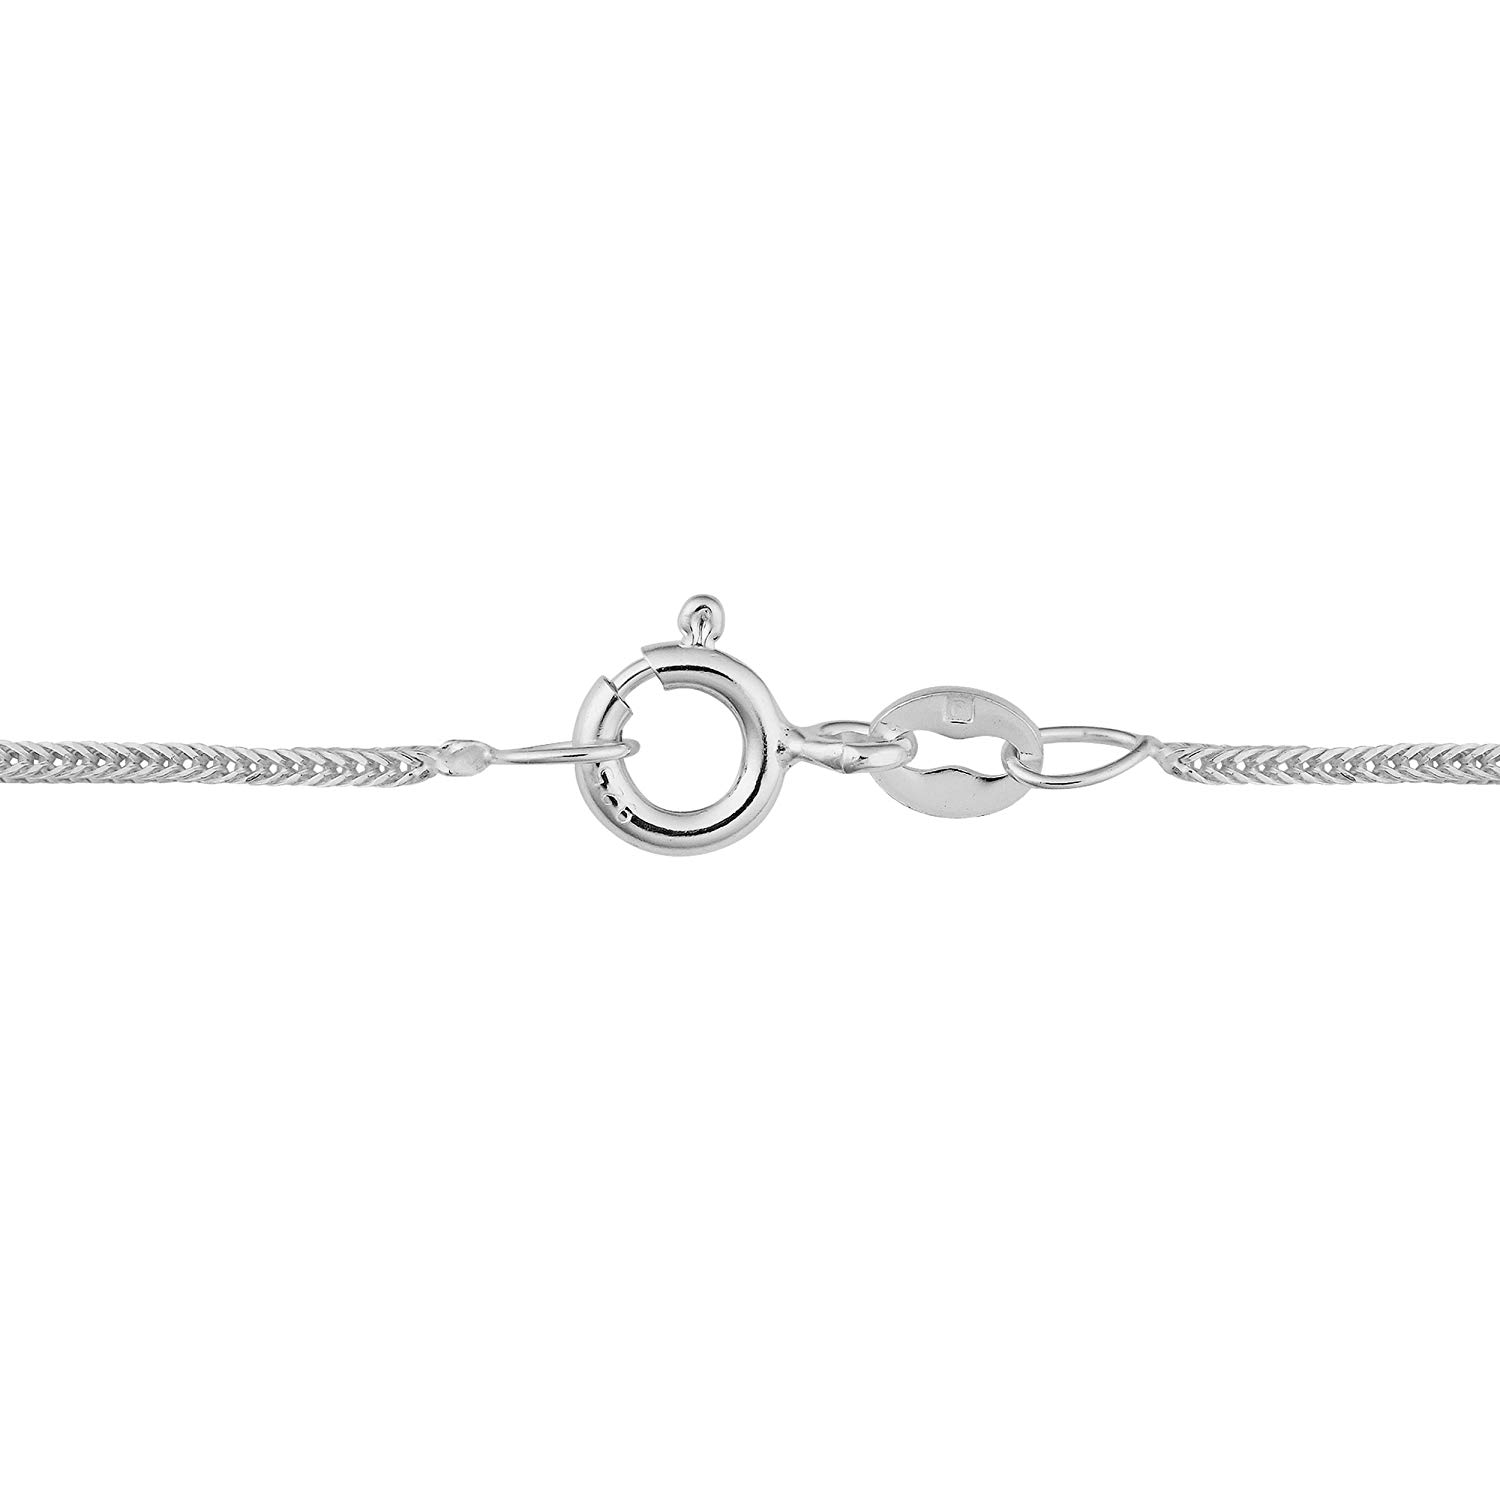 Amazon.com: Sterling Silver 0.8mm Foxtail Chain (16 inch): Chain ...